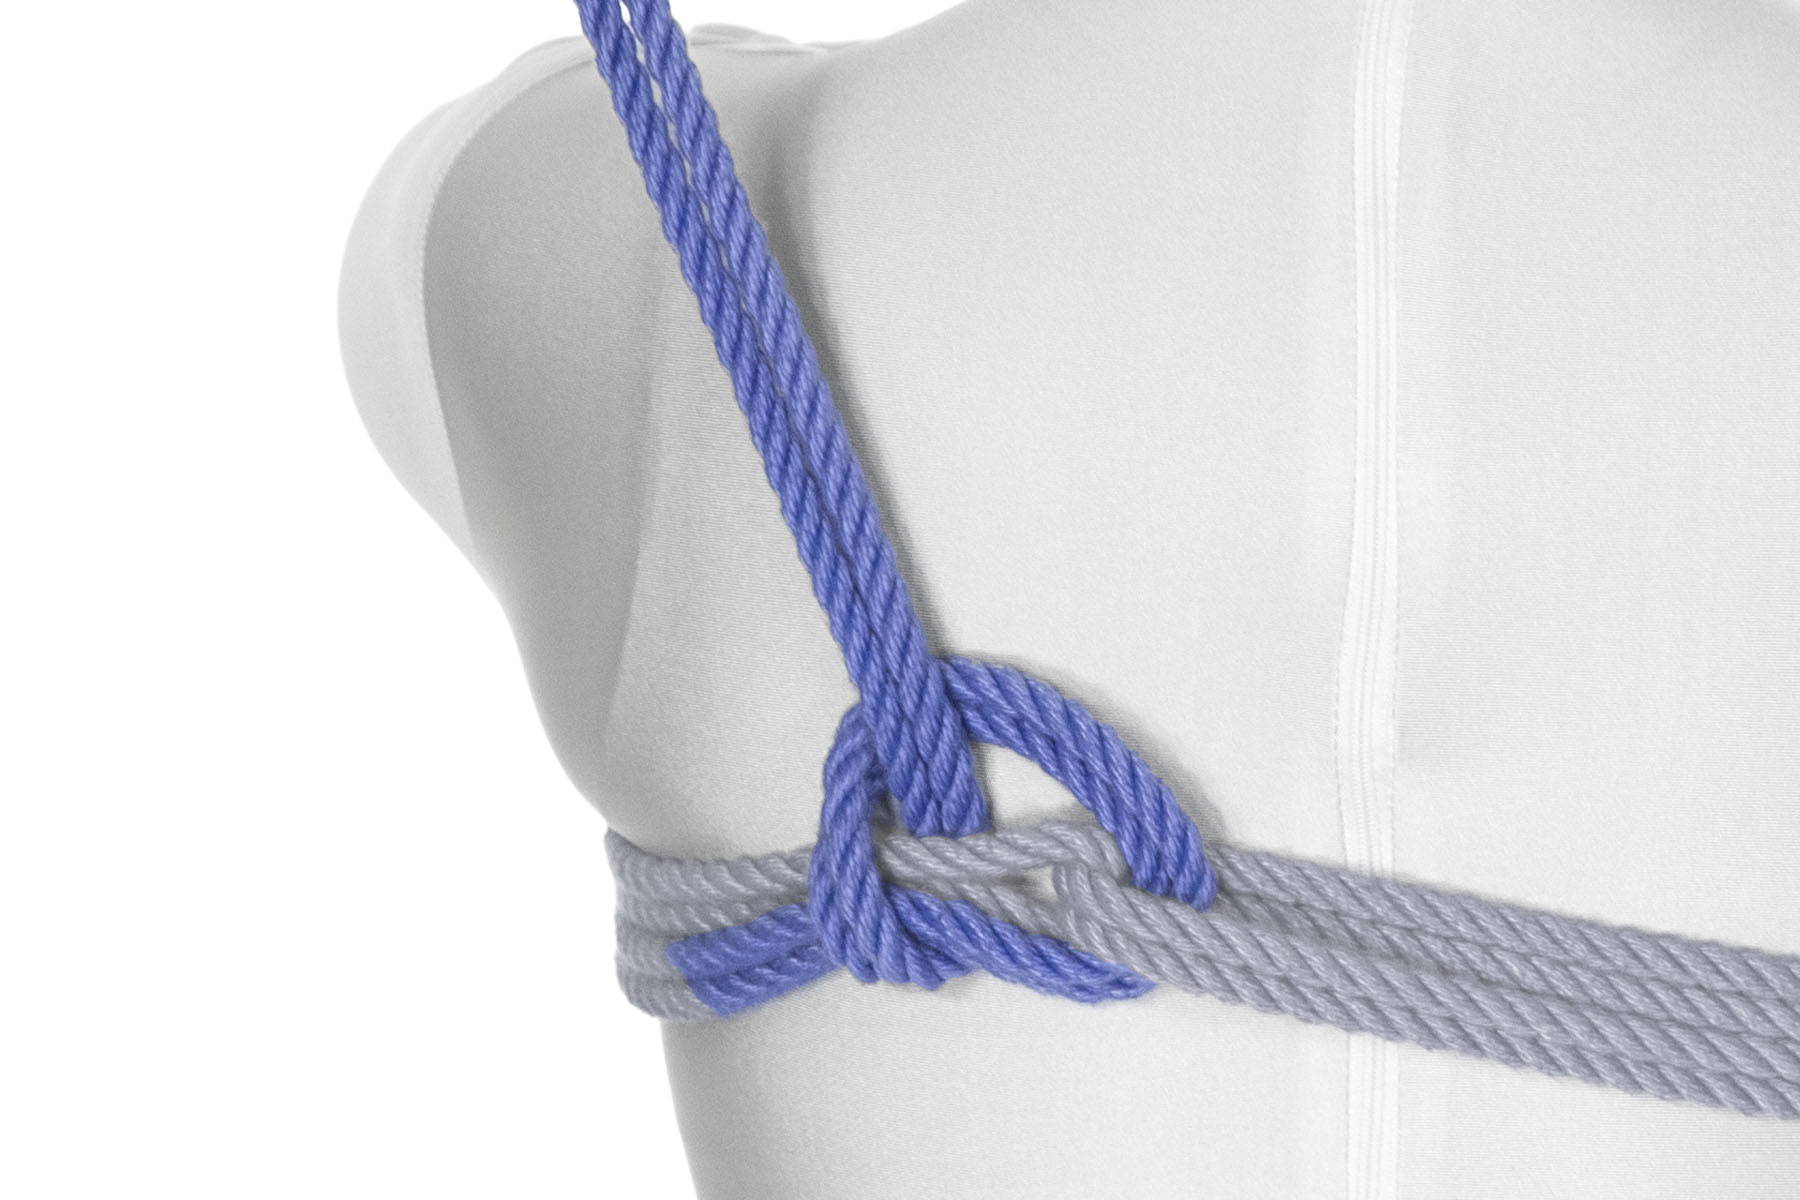 The rope goes over the chest wraps just to the left of the bight, back under them, and then over itself, making a half hitch. The end of the rope exits the half hitch in the direction of the left shoulder.